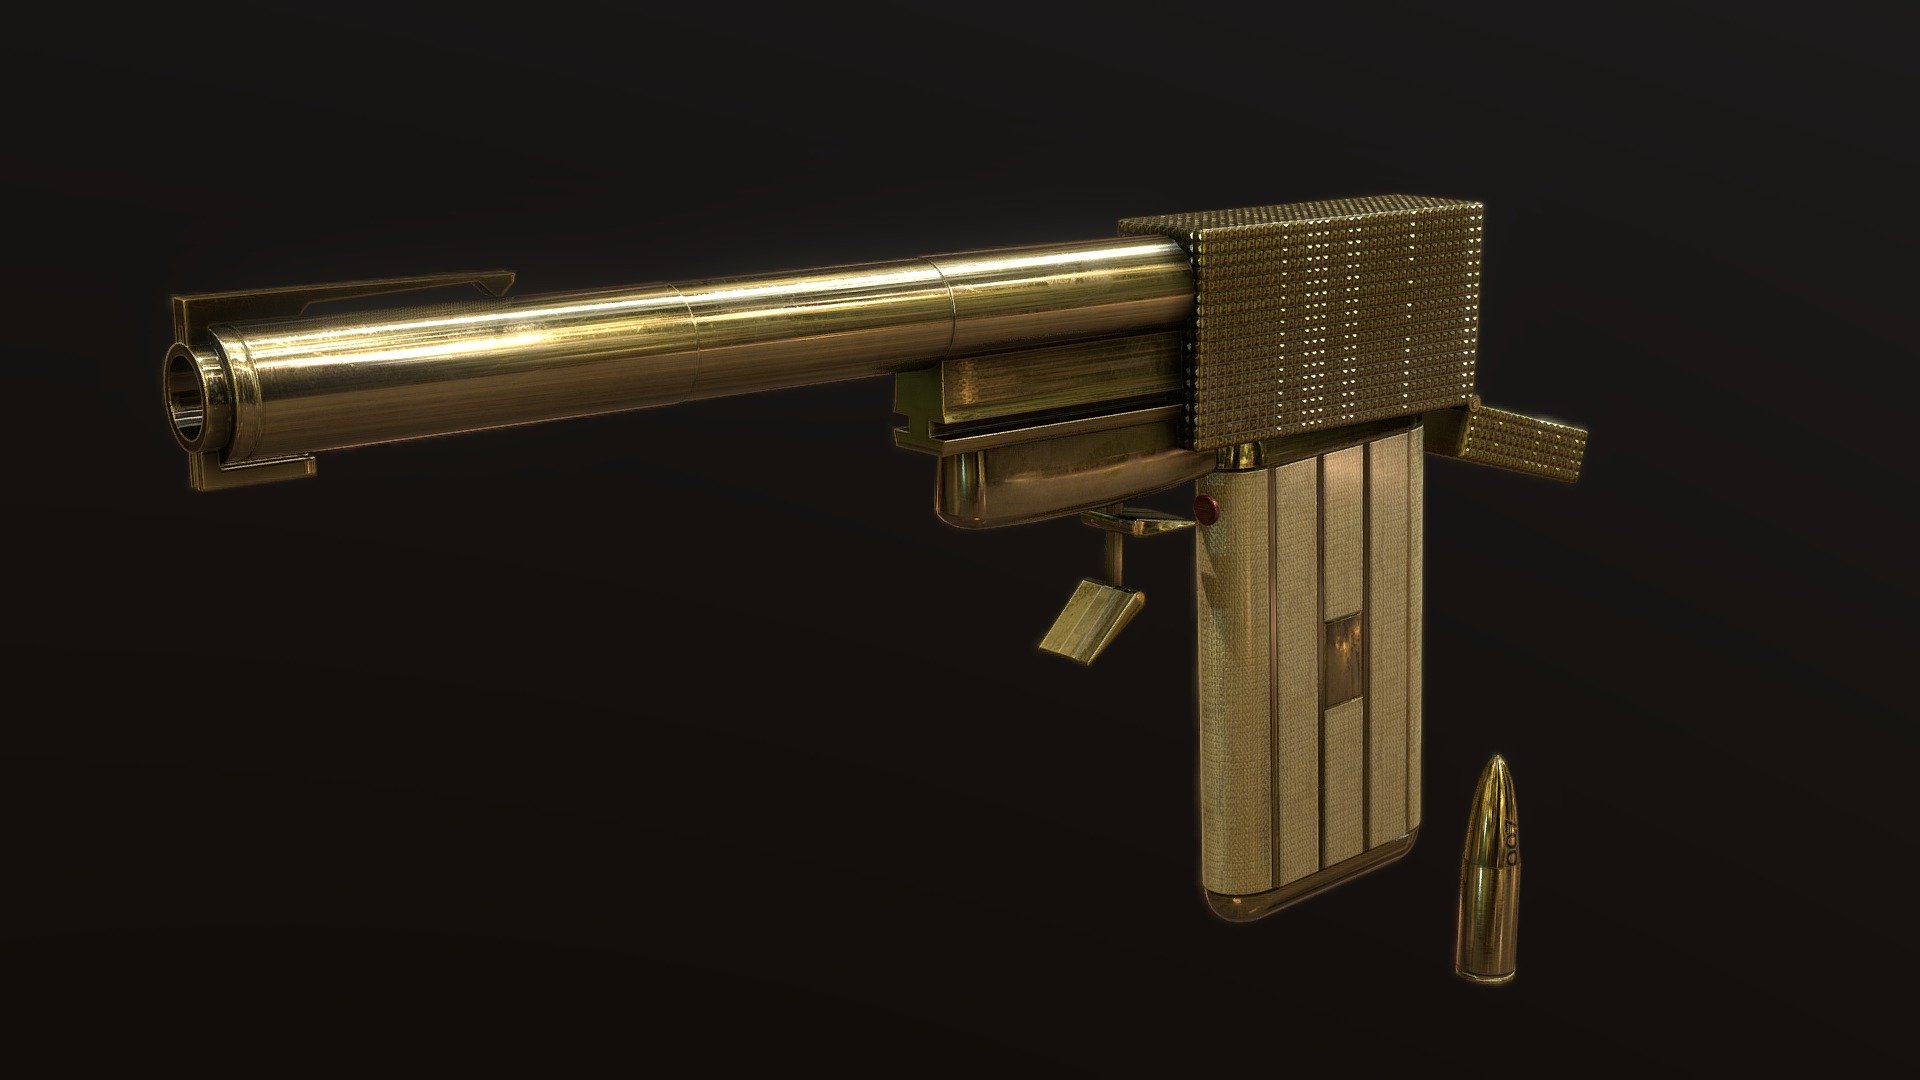 This is an accurate reconstruction of the 007 Golden Gun. Carefully studied with attention to detail.

The 3D Model has clean topology and is designed to be a low poly model with maximum details to the shape and silhouette. The model is fully textured with all materials applied. This is an optimized, high detailed model. 

Technical Details:

4K Textures (4096x4096 PNG format)
PBR Textures (Metallic Roughness)
OpenGL Normal Map
Baked High-poly to Low-poly
Game-Ready for AAA quality games

https://www.youtube.com/watch?v=2Cf_7qeNl5k&amp;ab_channel=CD3D

https://www.artstation.com/artwork/180mWG - 007 Golden Gun - 3D model by Chris Drelich (@CDrelich) 3d model